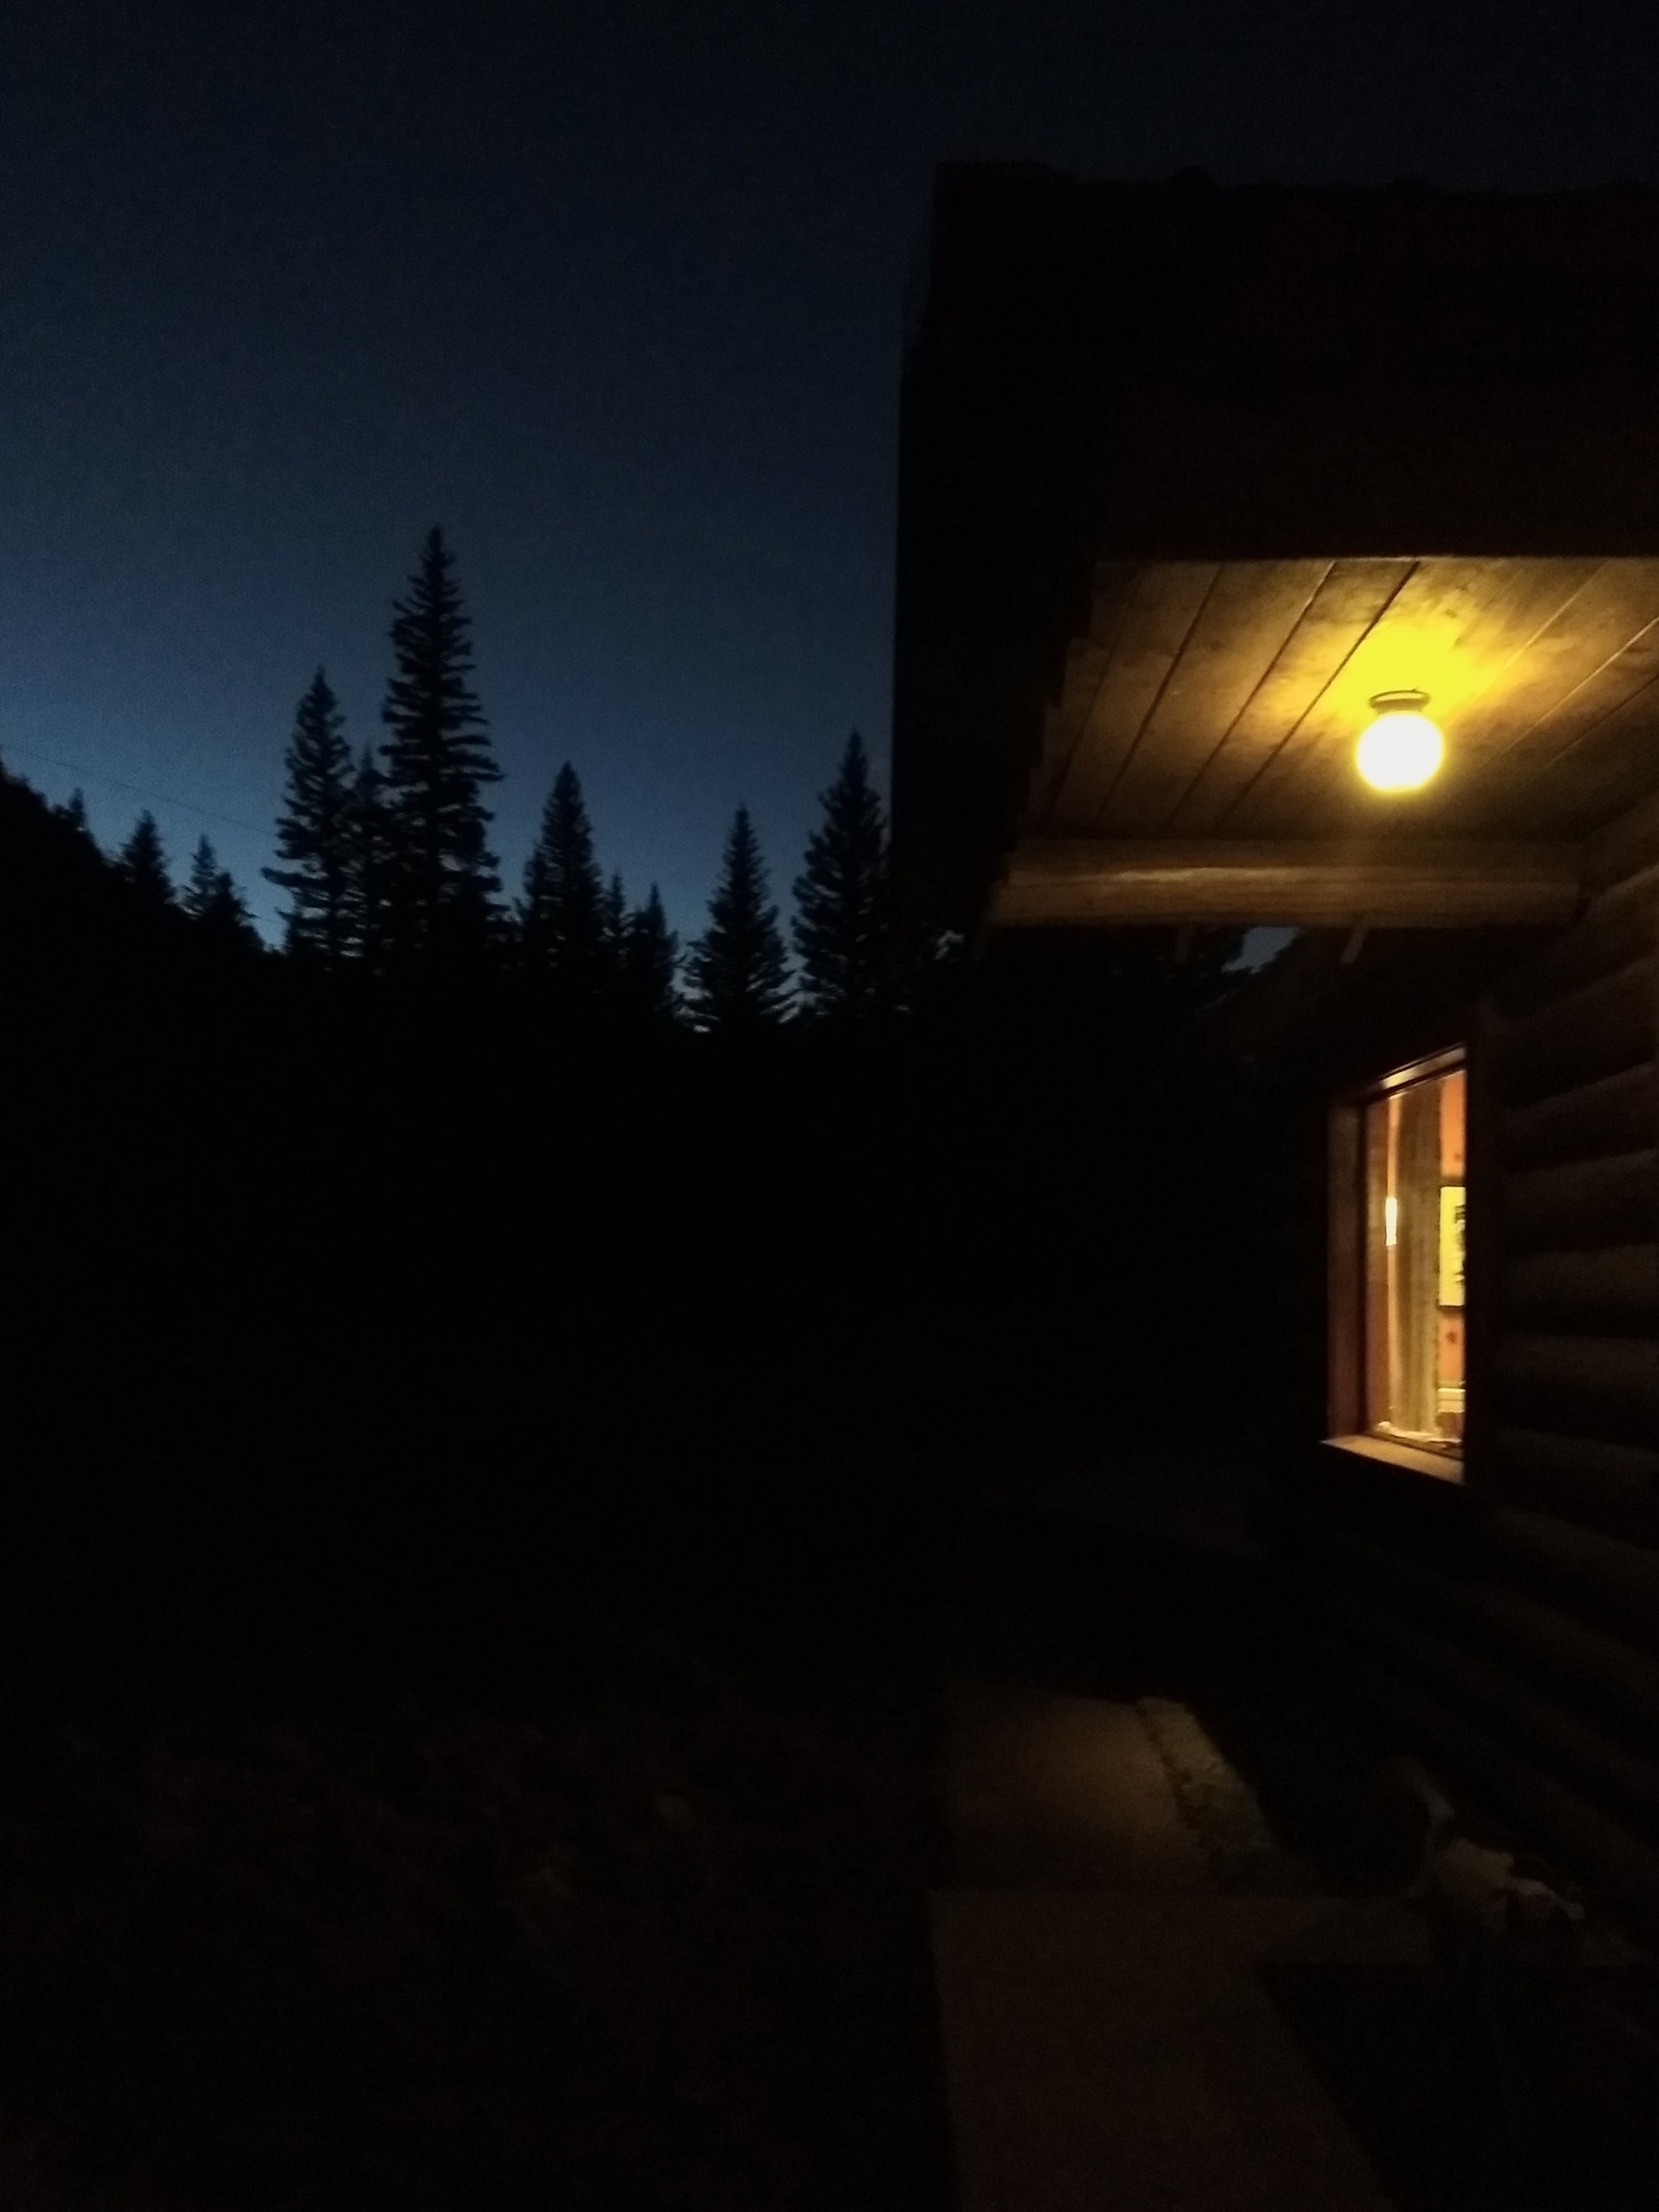 Porch light at dusk with pine trees in background silhouette